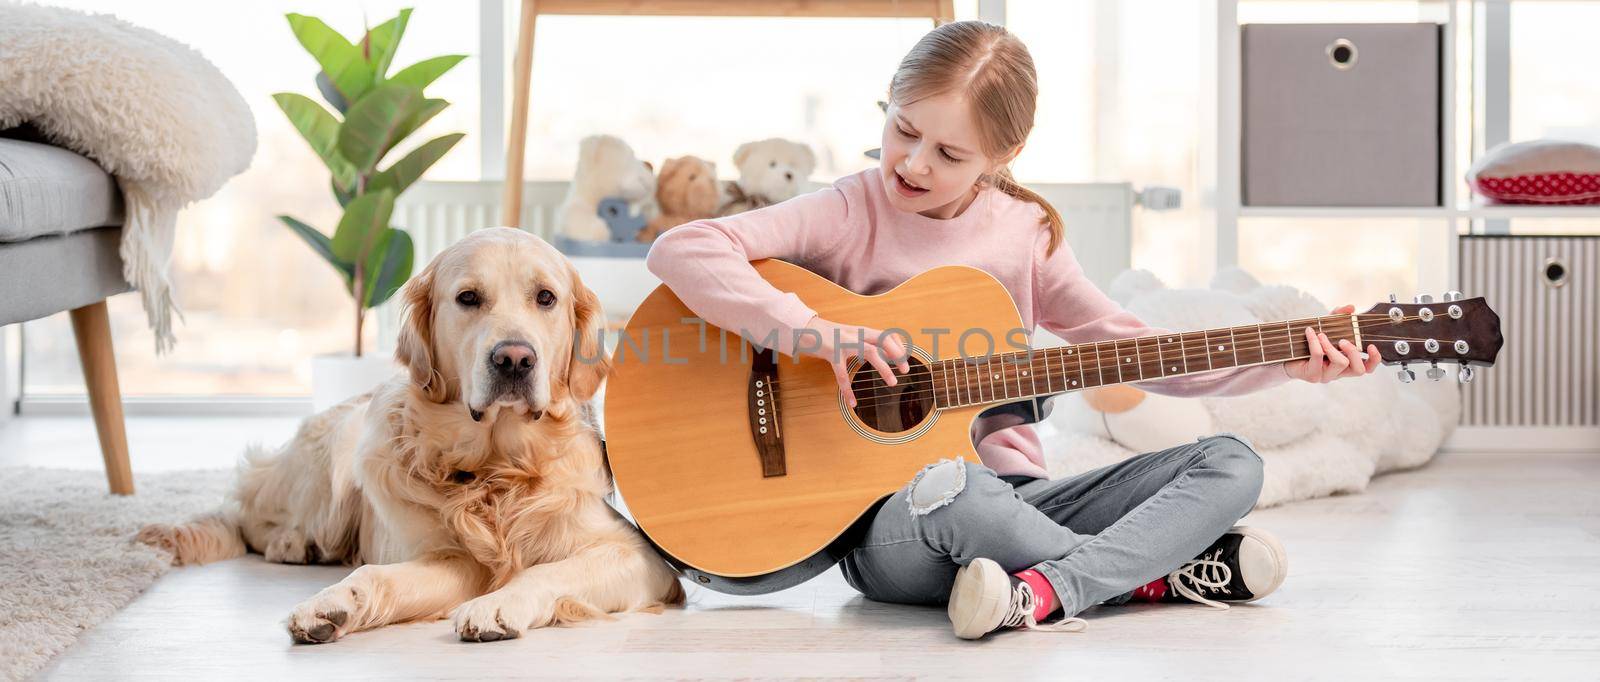 Little girl with guitar and golden retriever dog by tan4ikk1